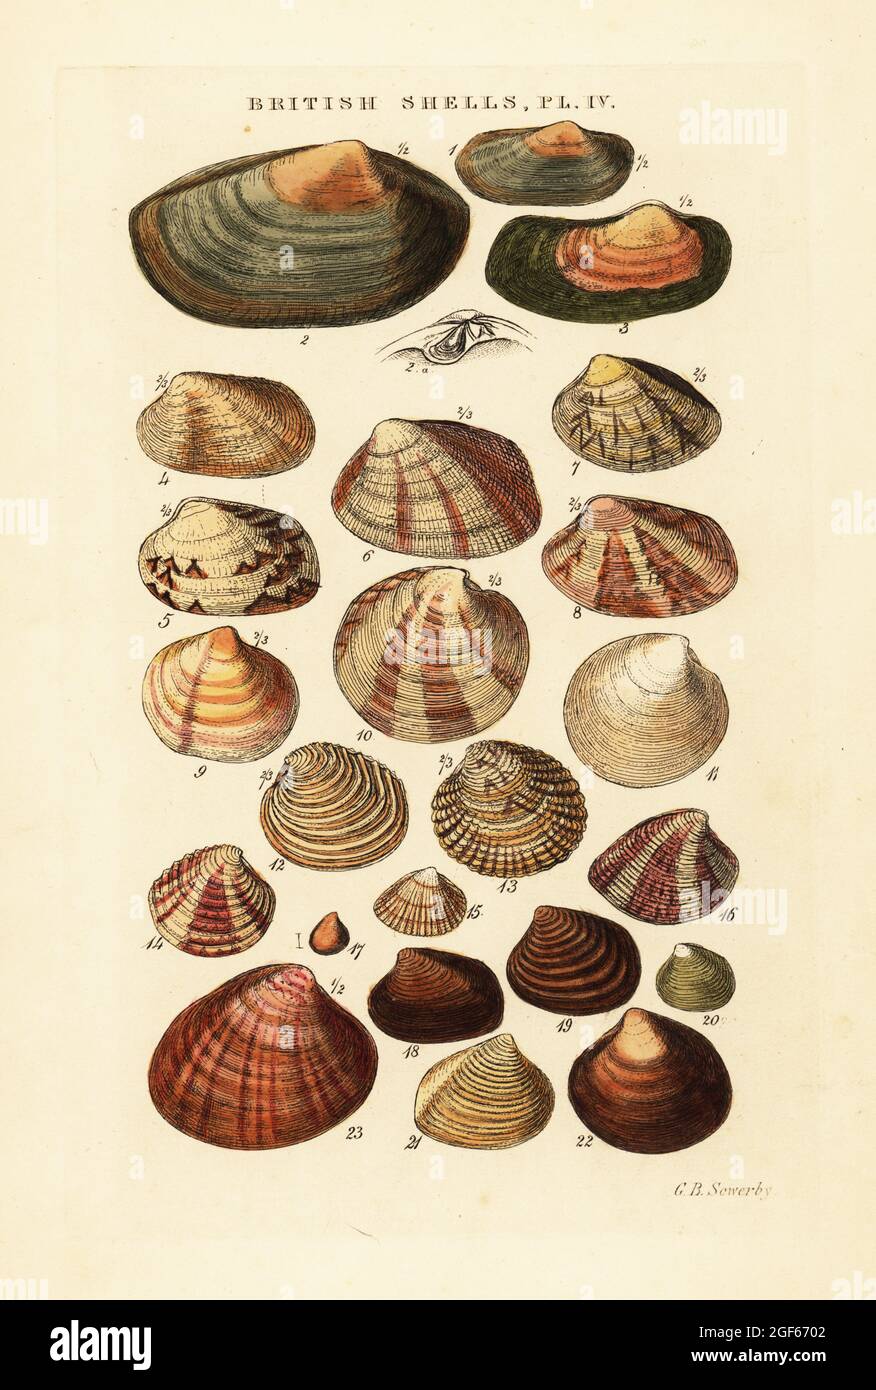 Saltwater clams, Venus casina, Astarte elliptica, Lutraria, Tapes, Lucinopsis, etc. Handcoloured copperplate engraving by George Brettingham Sowerby from his own Illustrated Index of British Shells, Sowerby and Simpkin, Marshall & Co., London, 1859. George Brettingham Sowerby II (1812-1884), British naturalist, illustrator, and conchologist. Stock Photo